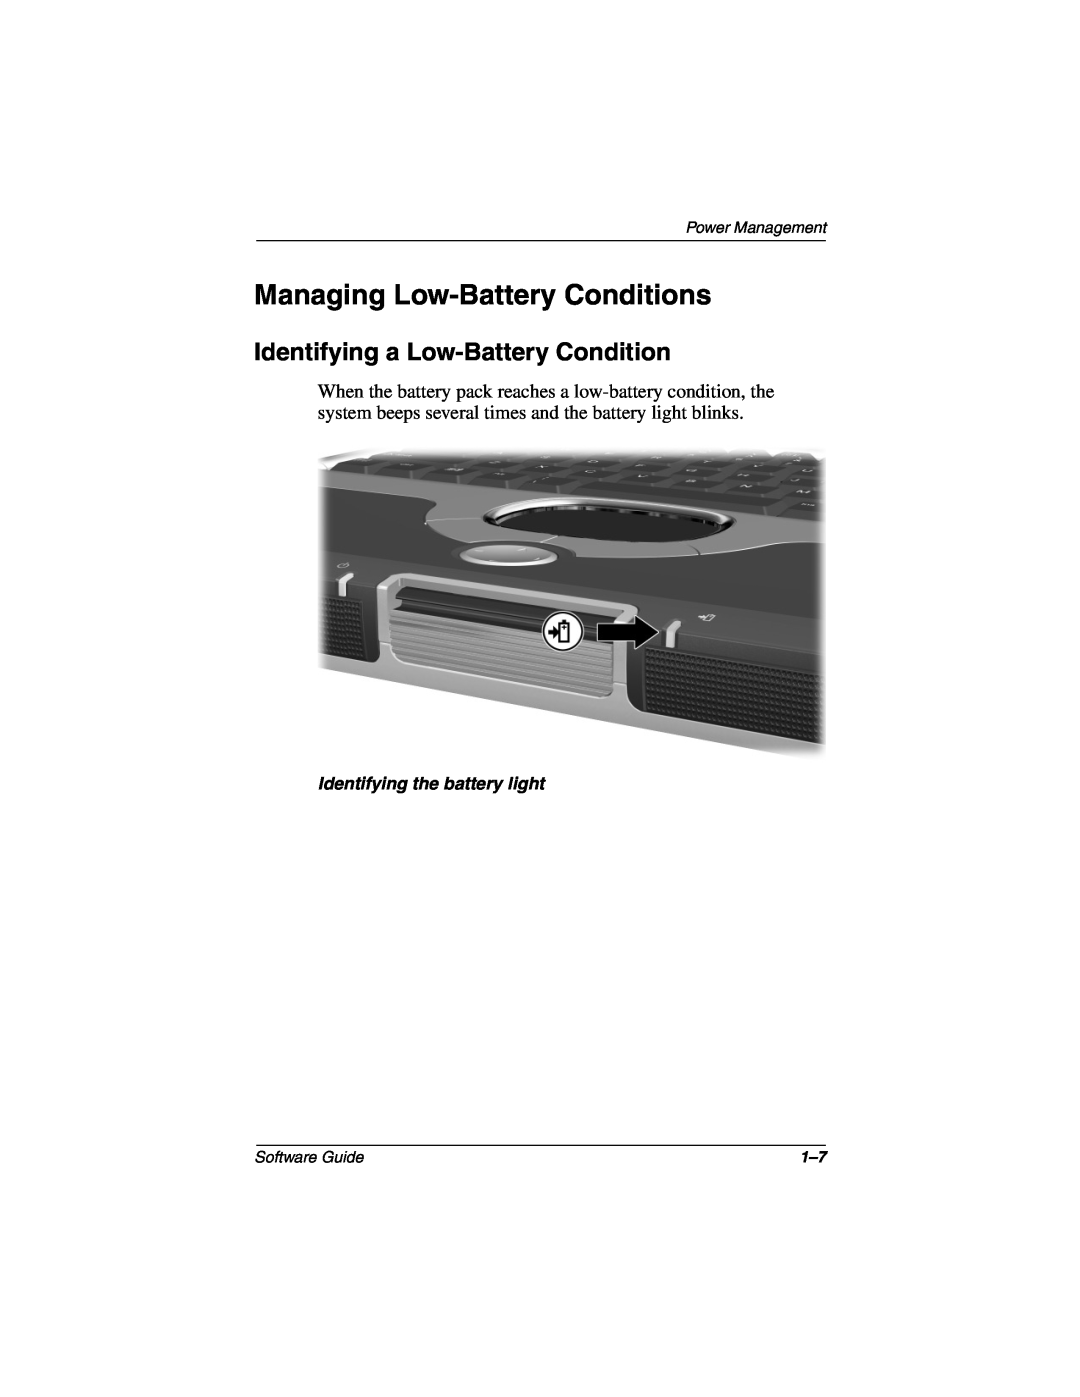 HP 905TC, 955AP, 950AP Managing Low-Battery Conditions, Identifying a Low-Battery Condition, Identifying the battery light 